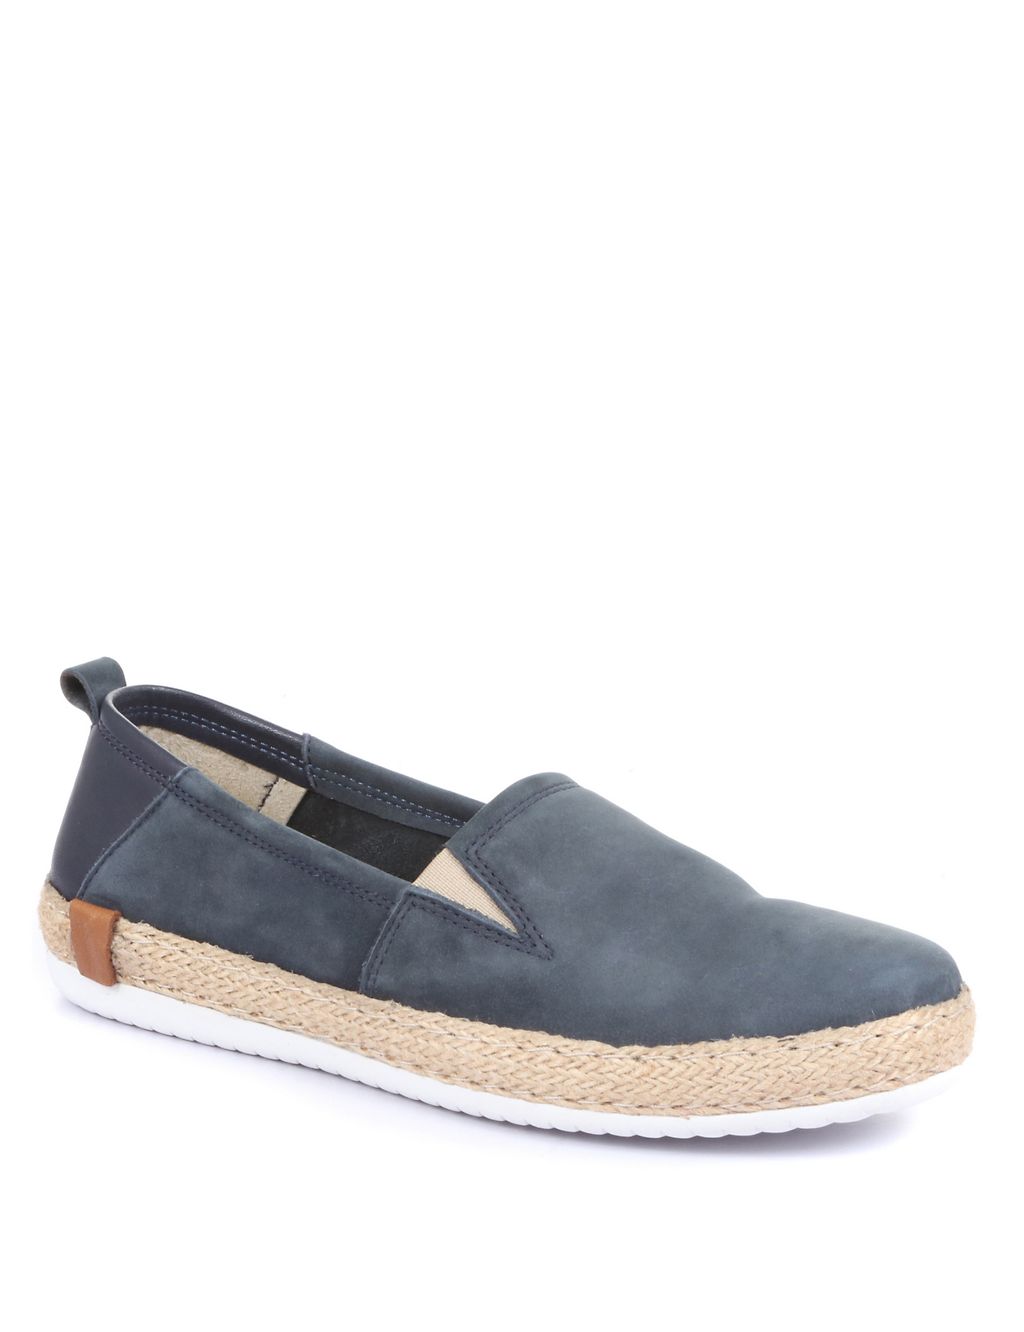 Leather Suede Flat Espadrilles 1 of 5